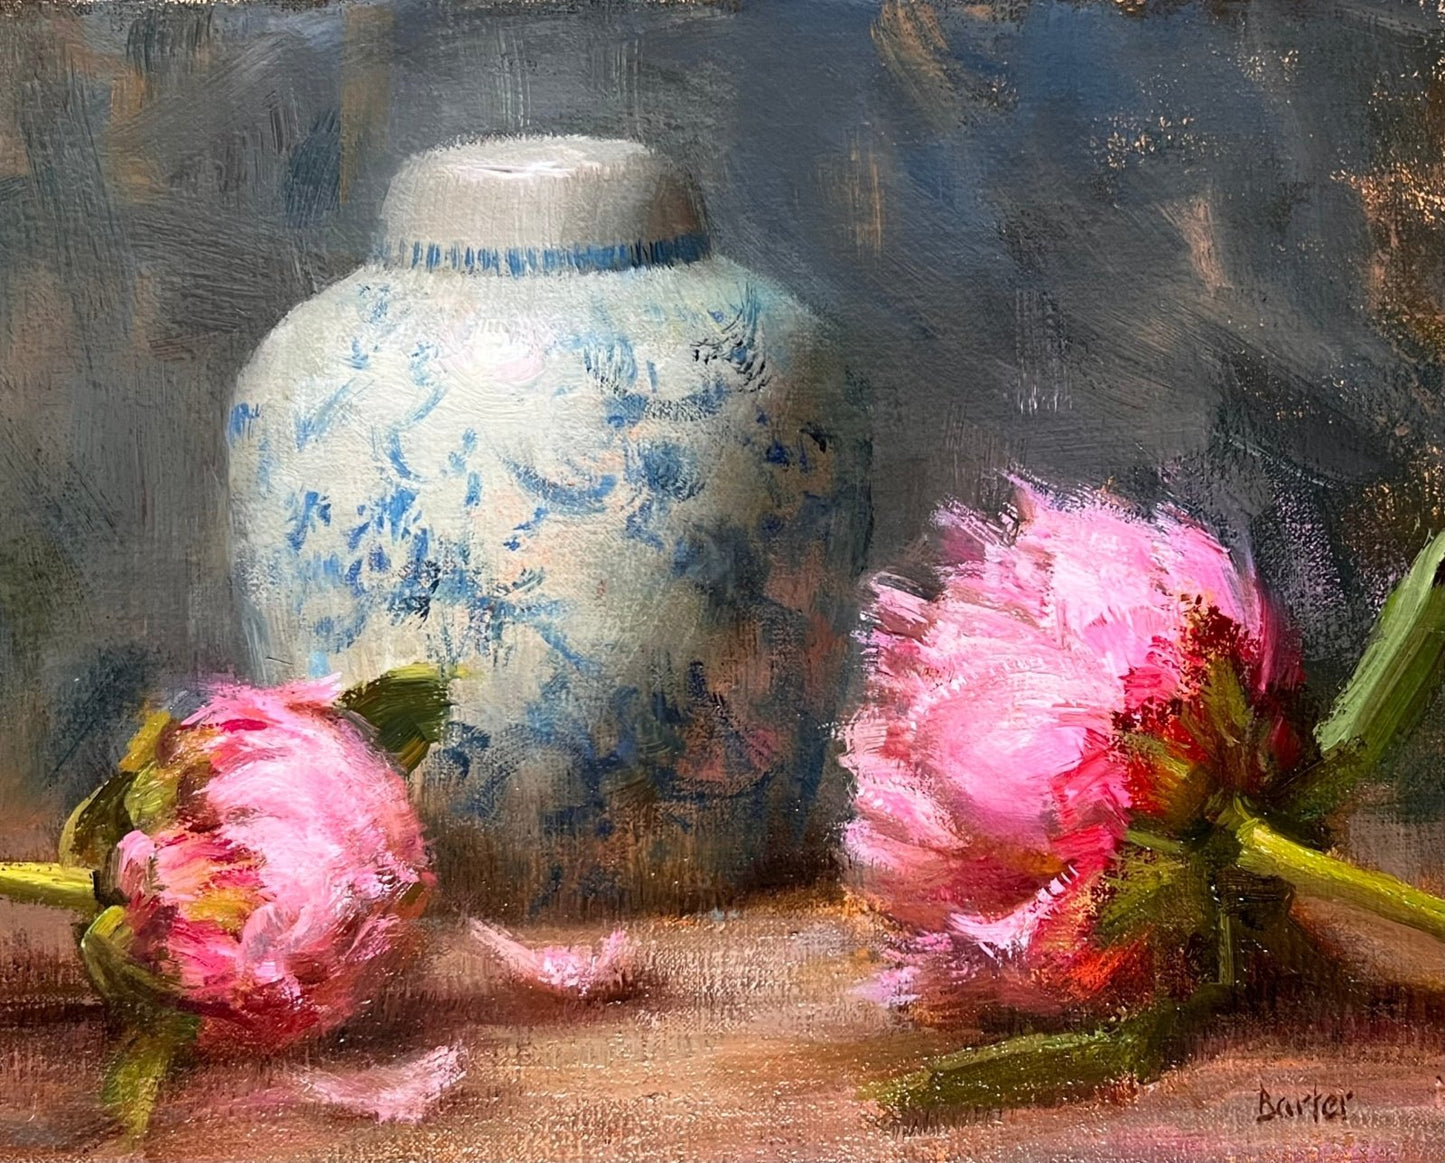 Ginger Jar with Opening Peonies by Stacy Barter at LePrince Galleries